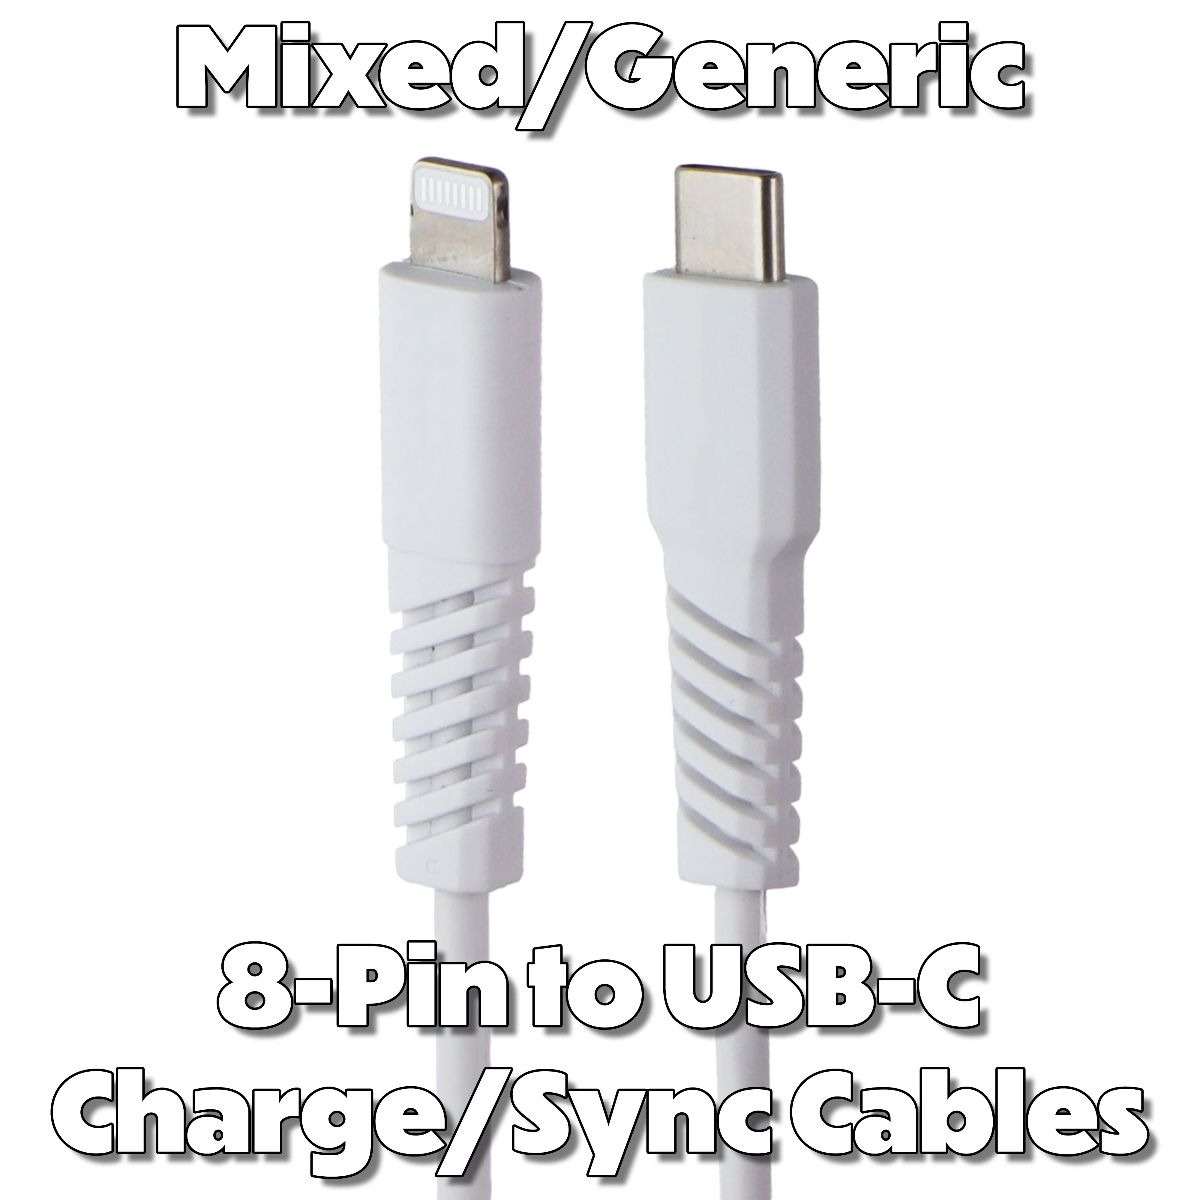 Mixed/Generic Lightning 8-Pin to USB-C Charge/Sync Cables - Mixed Brands/Style Cell Phone - Cables & Adapters Unbranded    - Simple Cell Bulk Wholesale Pricing - USA Seller